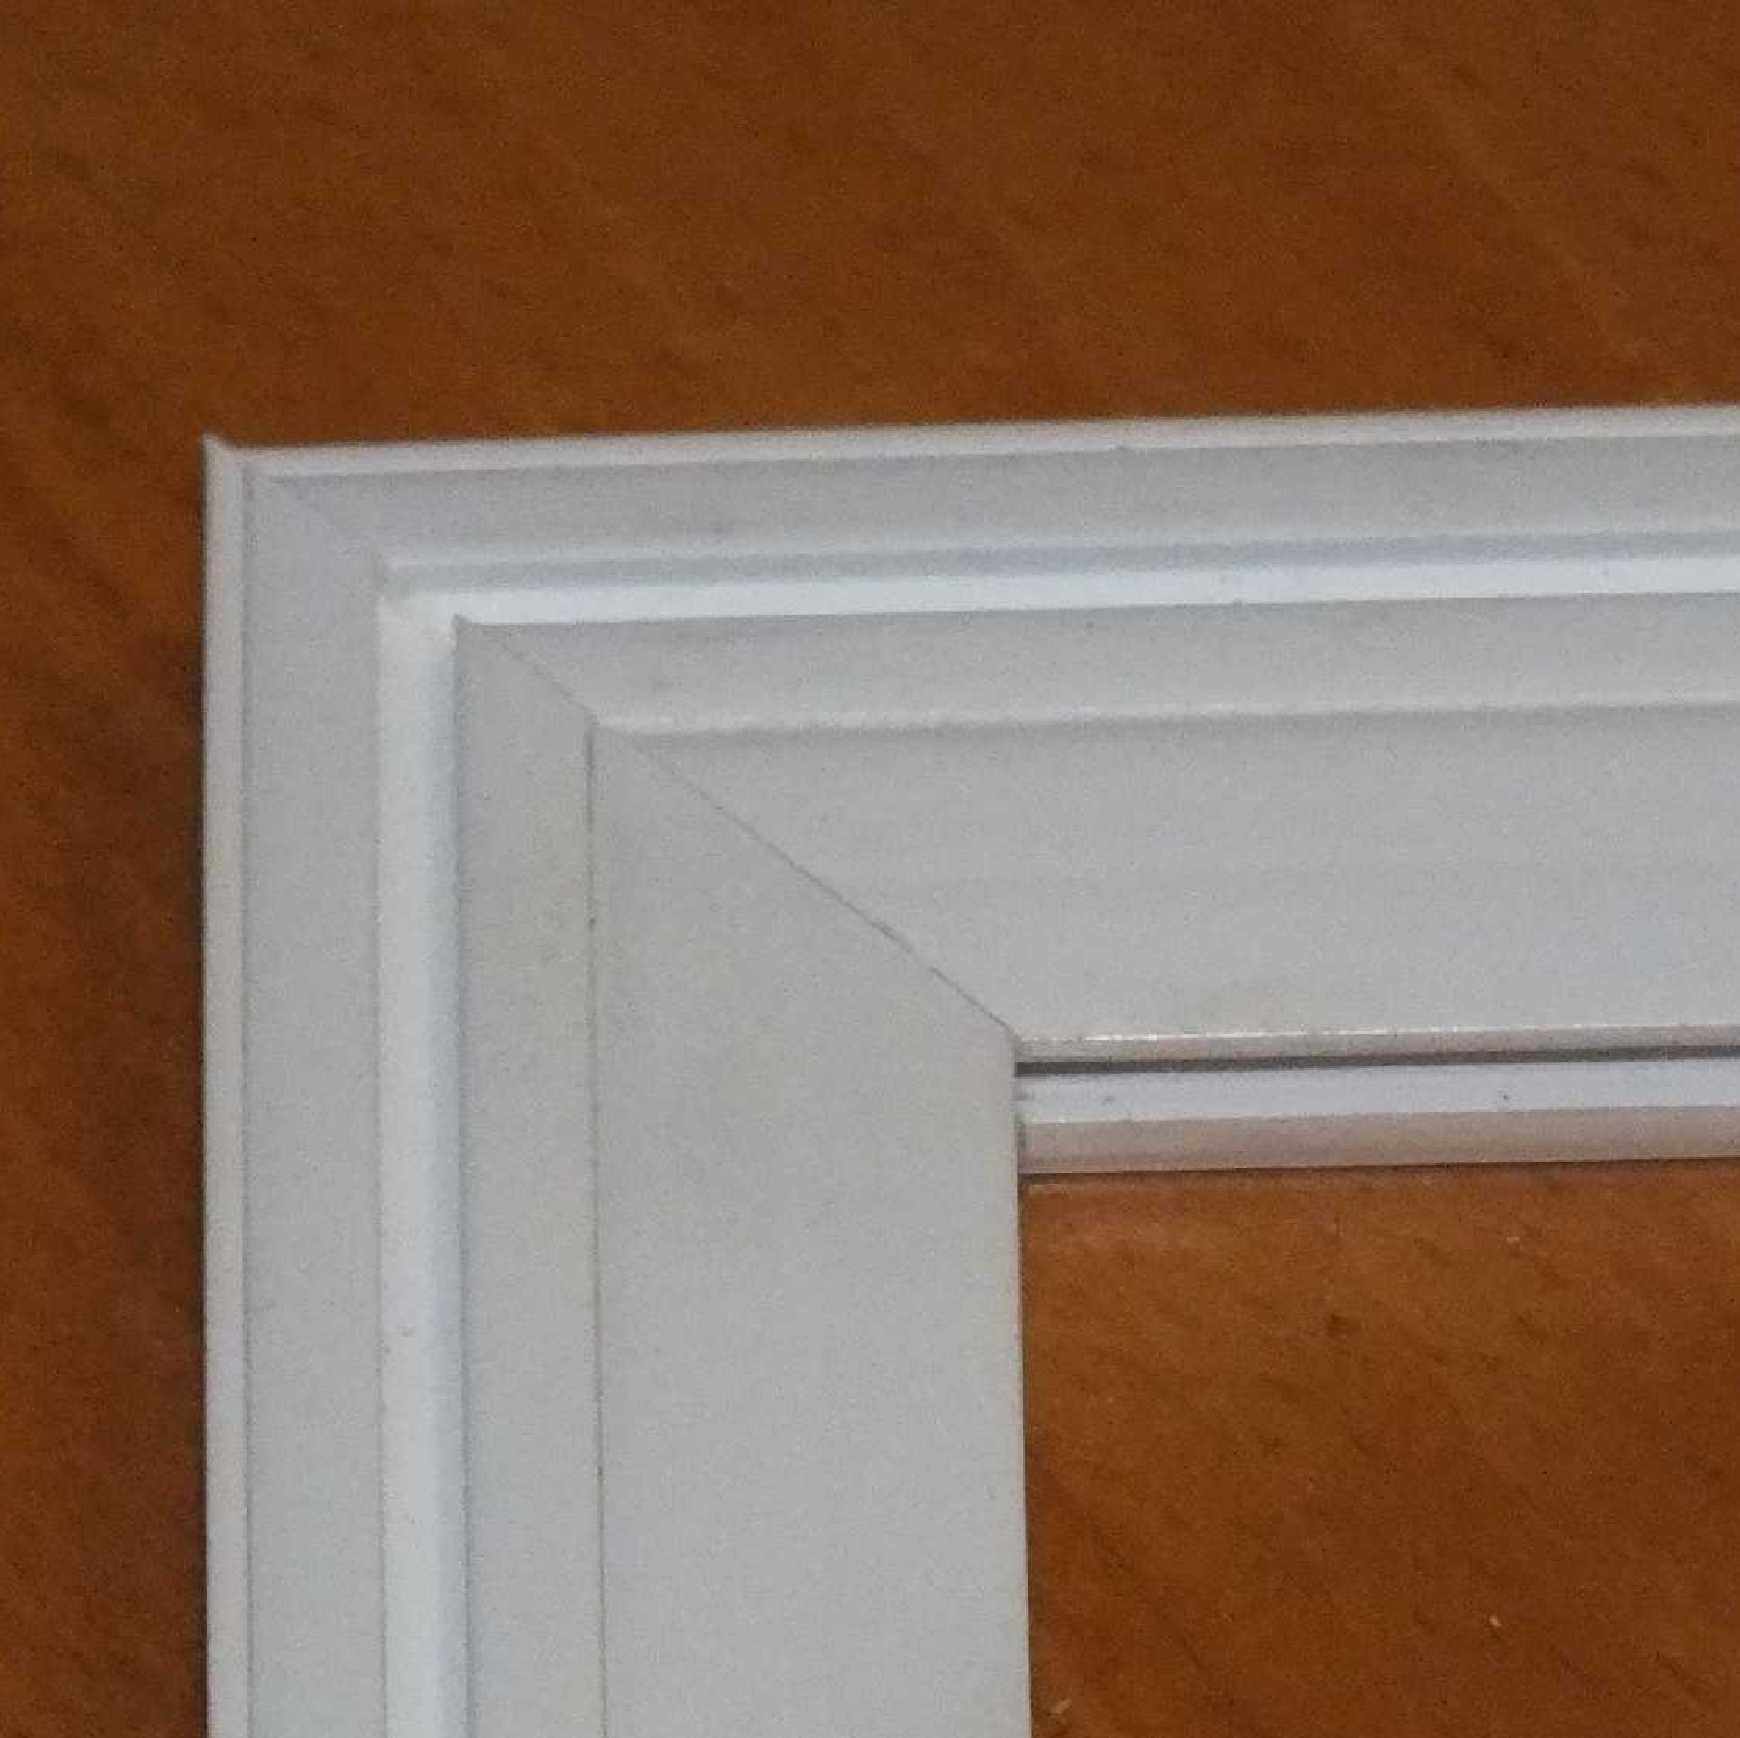 Buy Special Offer Smartframe Secondary Glazing kit online today